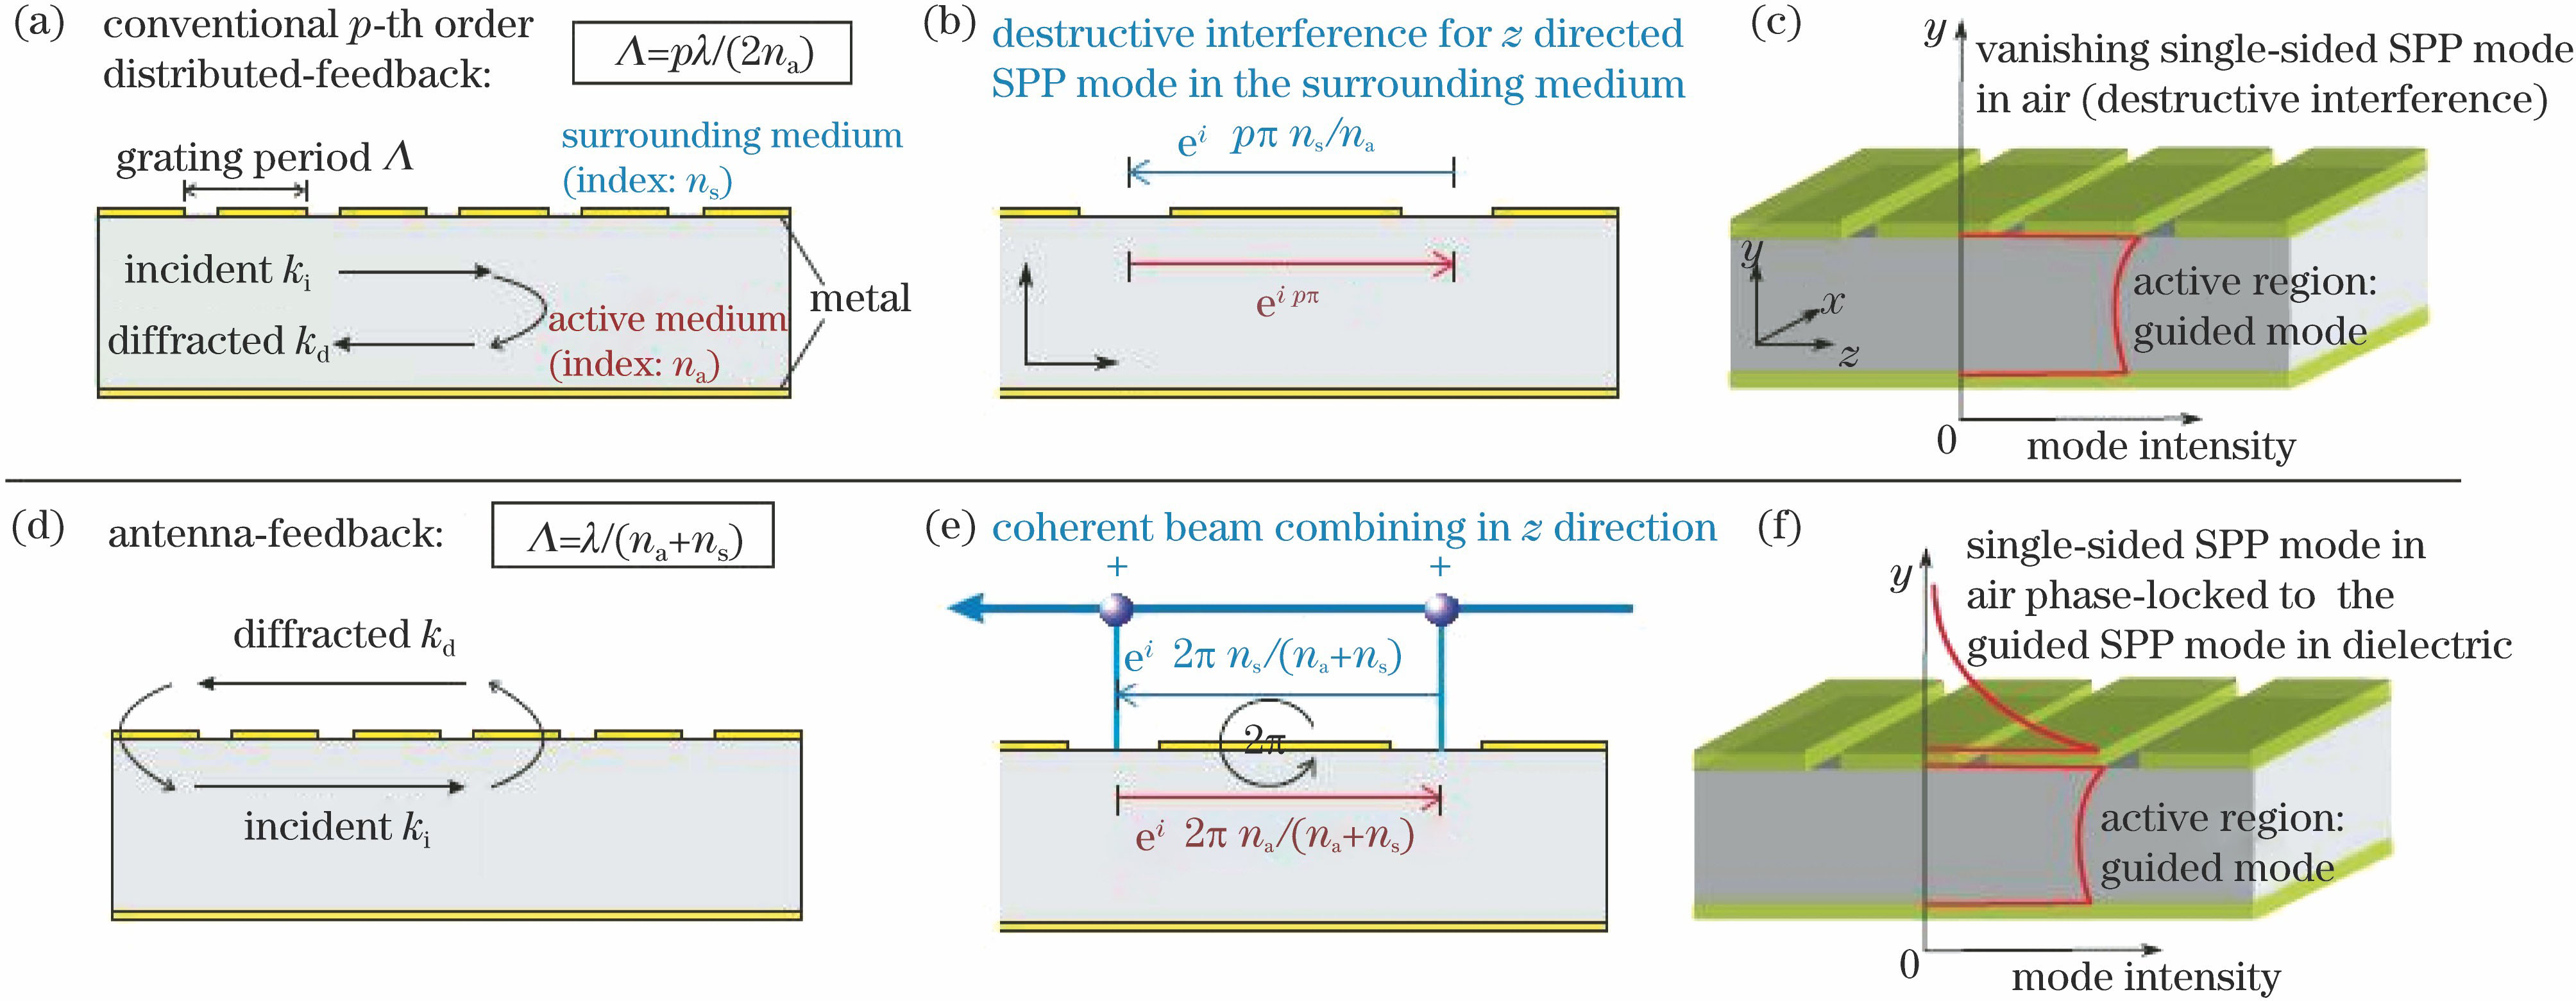 Comparison of conventional p-th order DFB and antenna-feedback scheme for THz QCLs. (a) Principle of conventional DFB that can be implemented in the waveguide of THz QCLs;(b) phase mismatch of surface plasma THz fields between adjacent transmission apertures of conventional DFB;(c) discontinuous single-sided plasmas in surrounding medium owing to destructive interference; (d) principle of antenna-feedback scheme for terahertz QCLs; (e) antenna-feedback leads to a fixed surface plasma THz field p